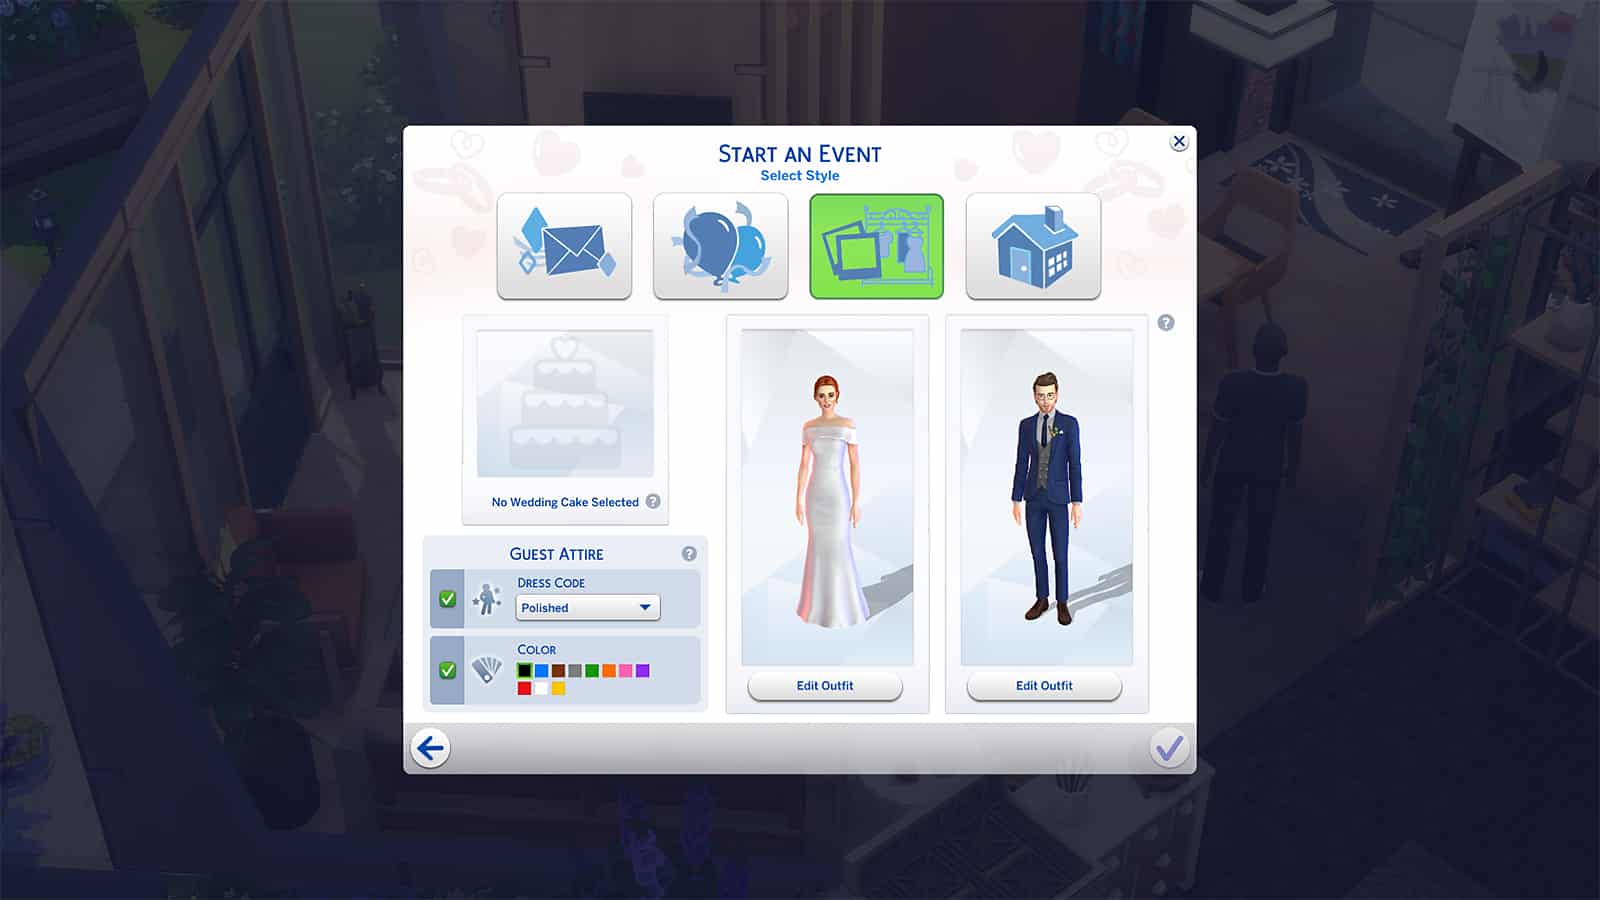 An image of the plan event menu in The Sims 4 My Wedding Stories